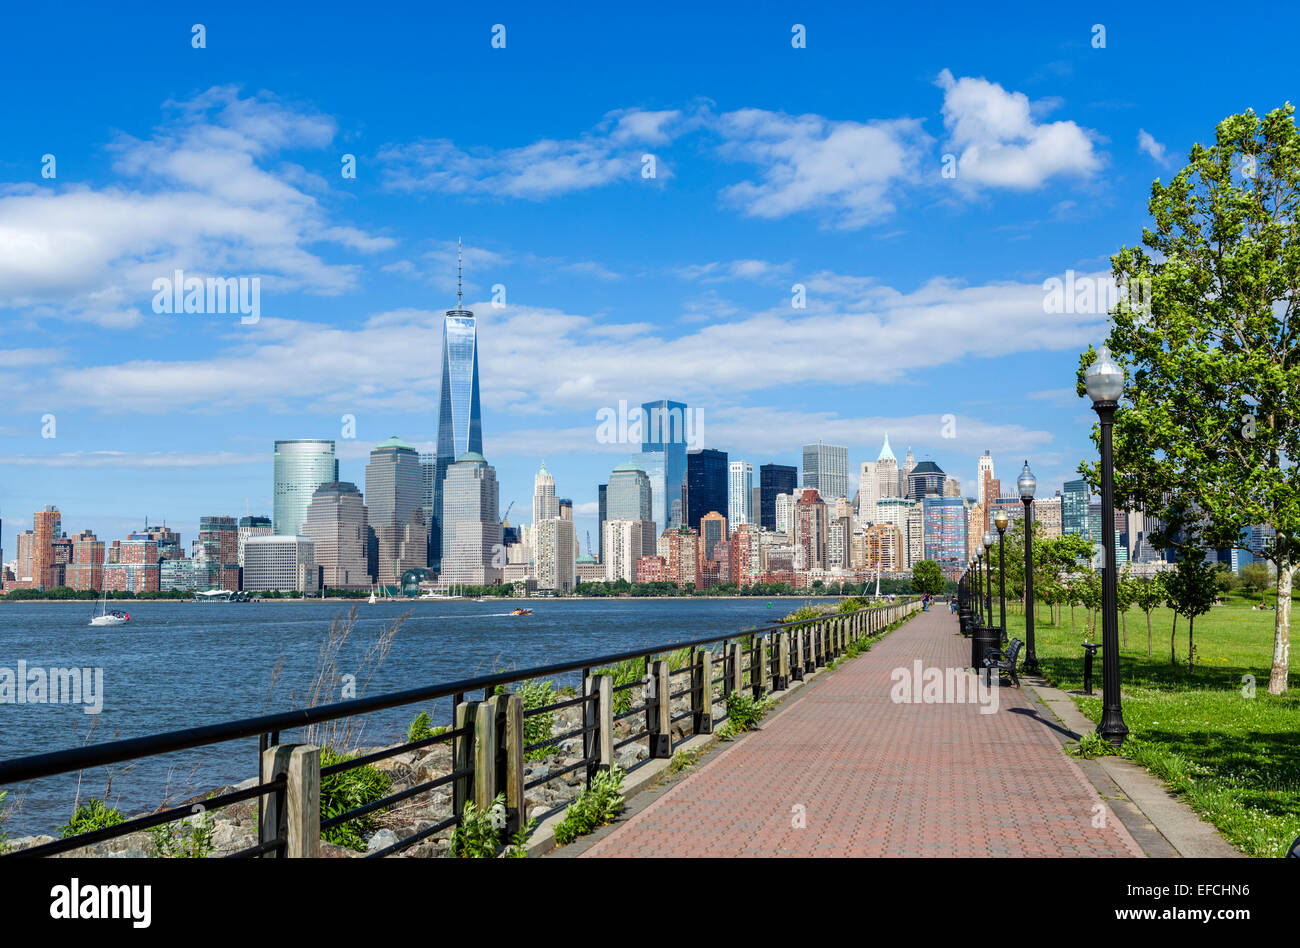 The Lower Manhattan skyline in dowtown New York City viewed across the Hudson River from Liberty State Park in New Jersey, USA Stock Photo